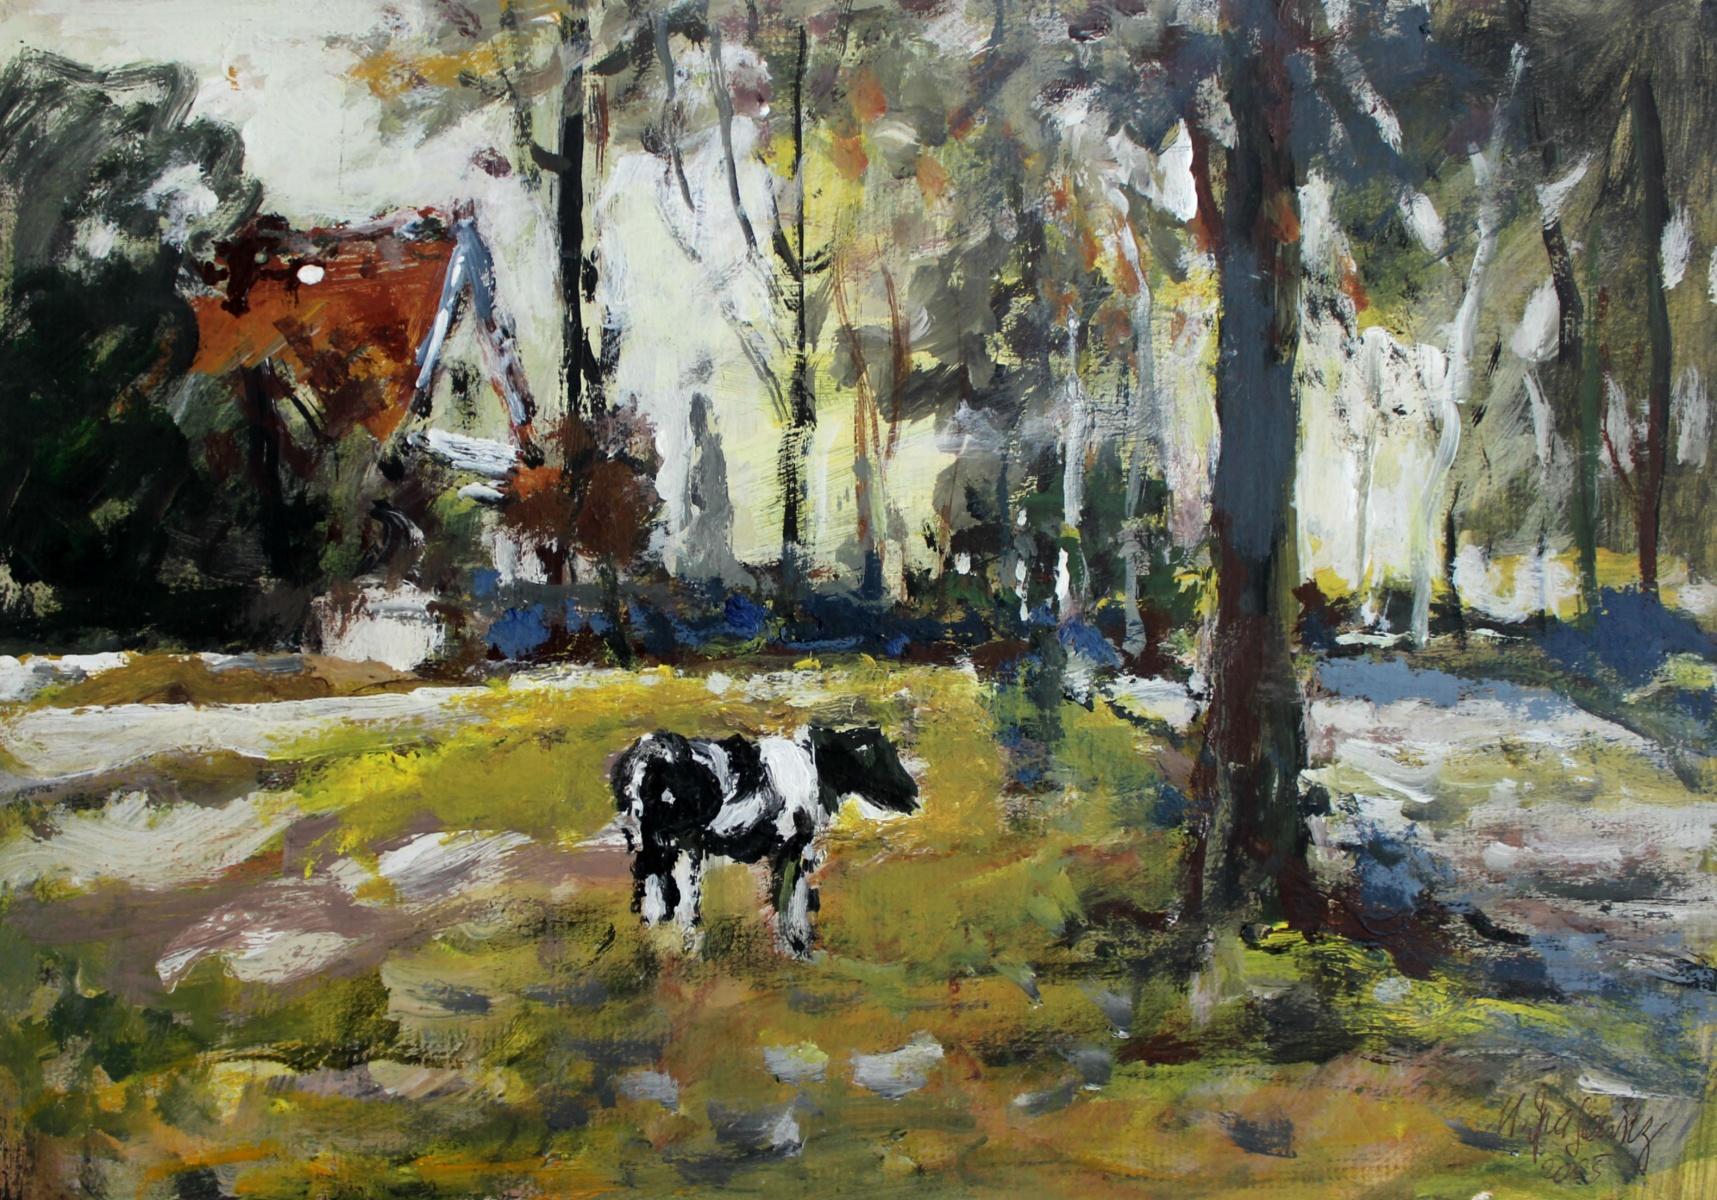 Magdalena Spasowicz Figurative Painting - Country view - 21 century, Oil painting, Figurative, Landscape, Warm tones